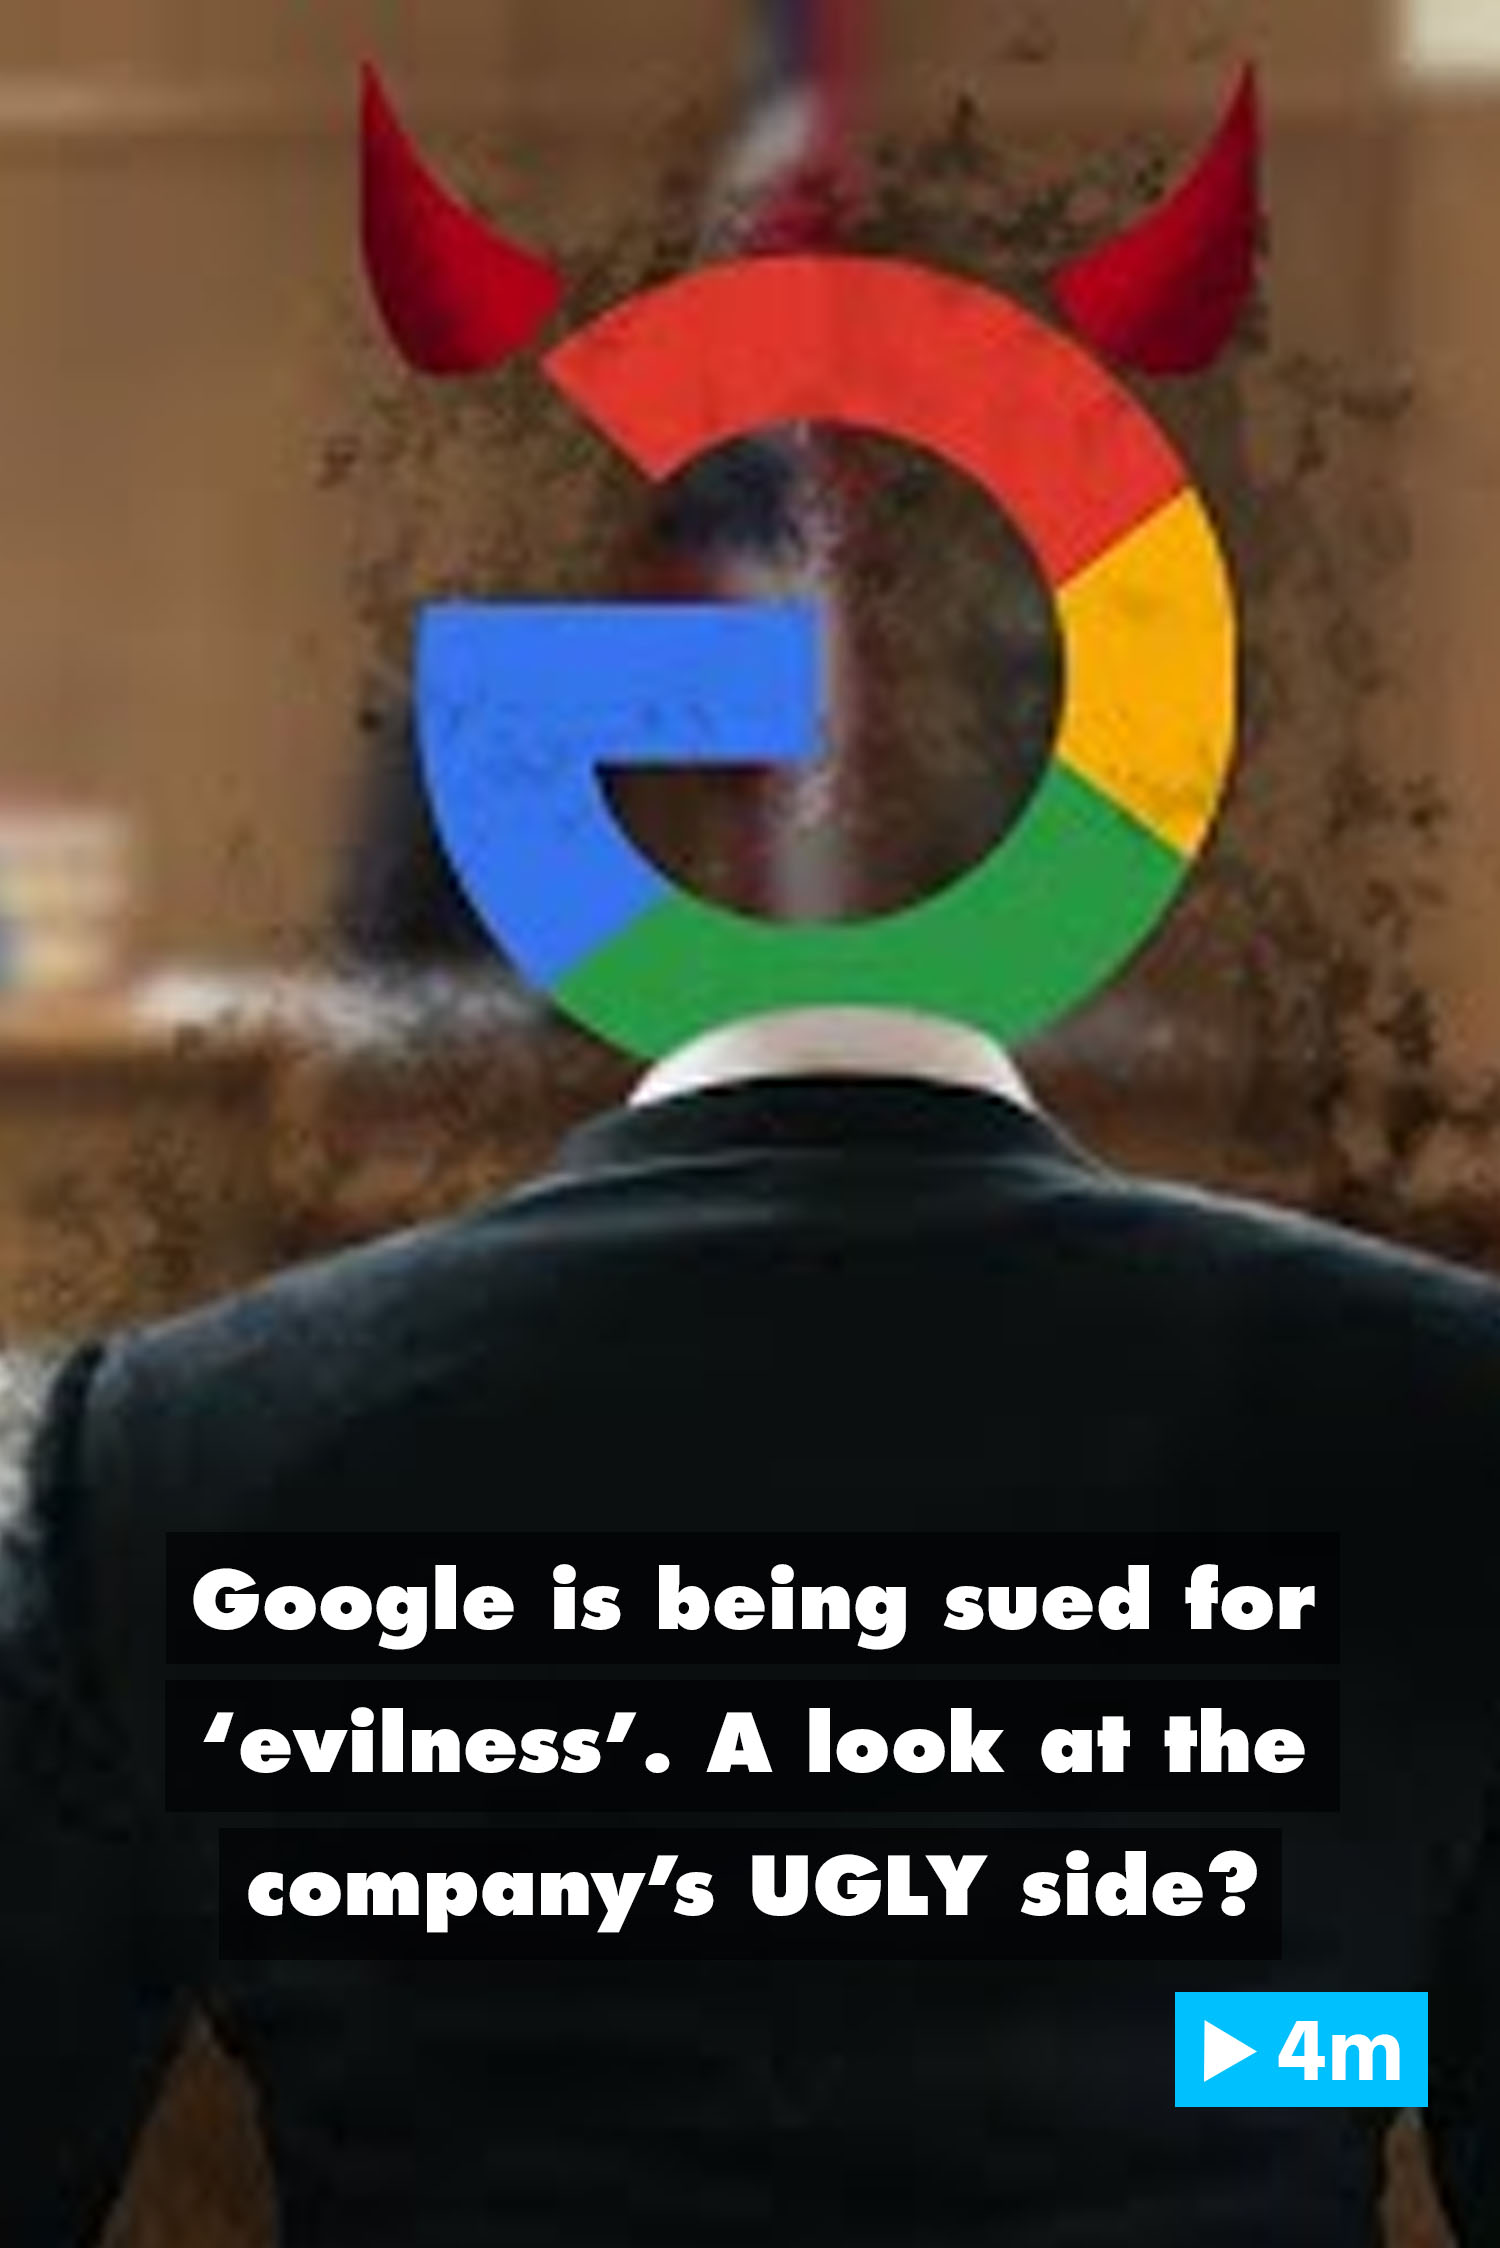 Google is being sued for 'evilness.' A look at the company's UGLY side?